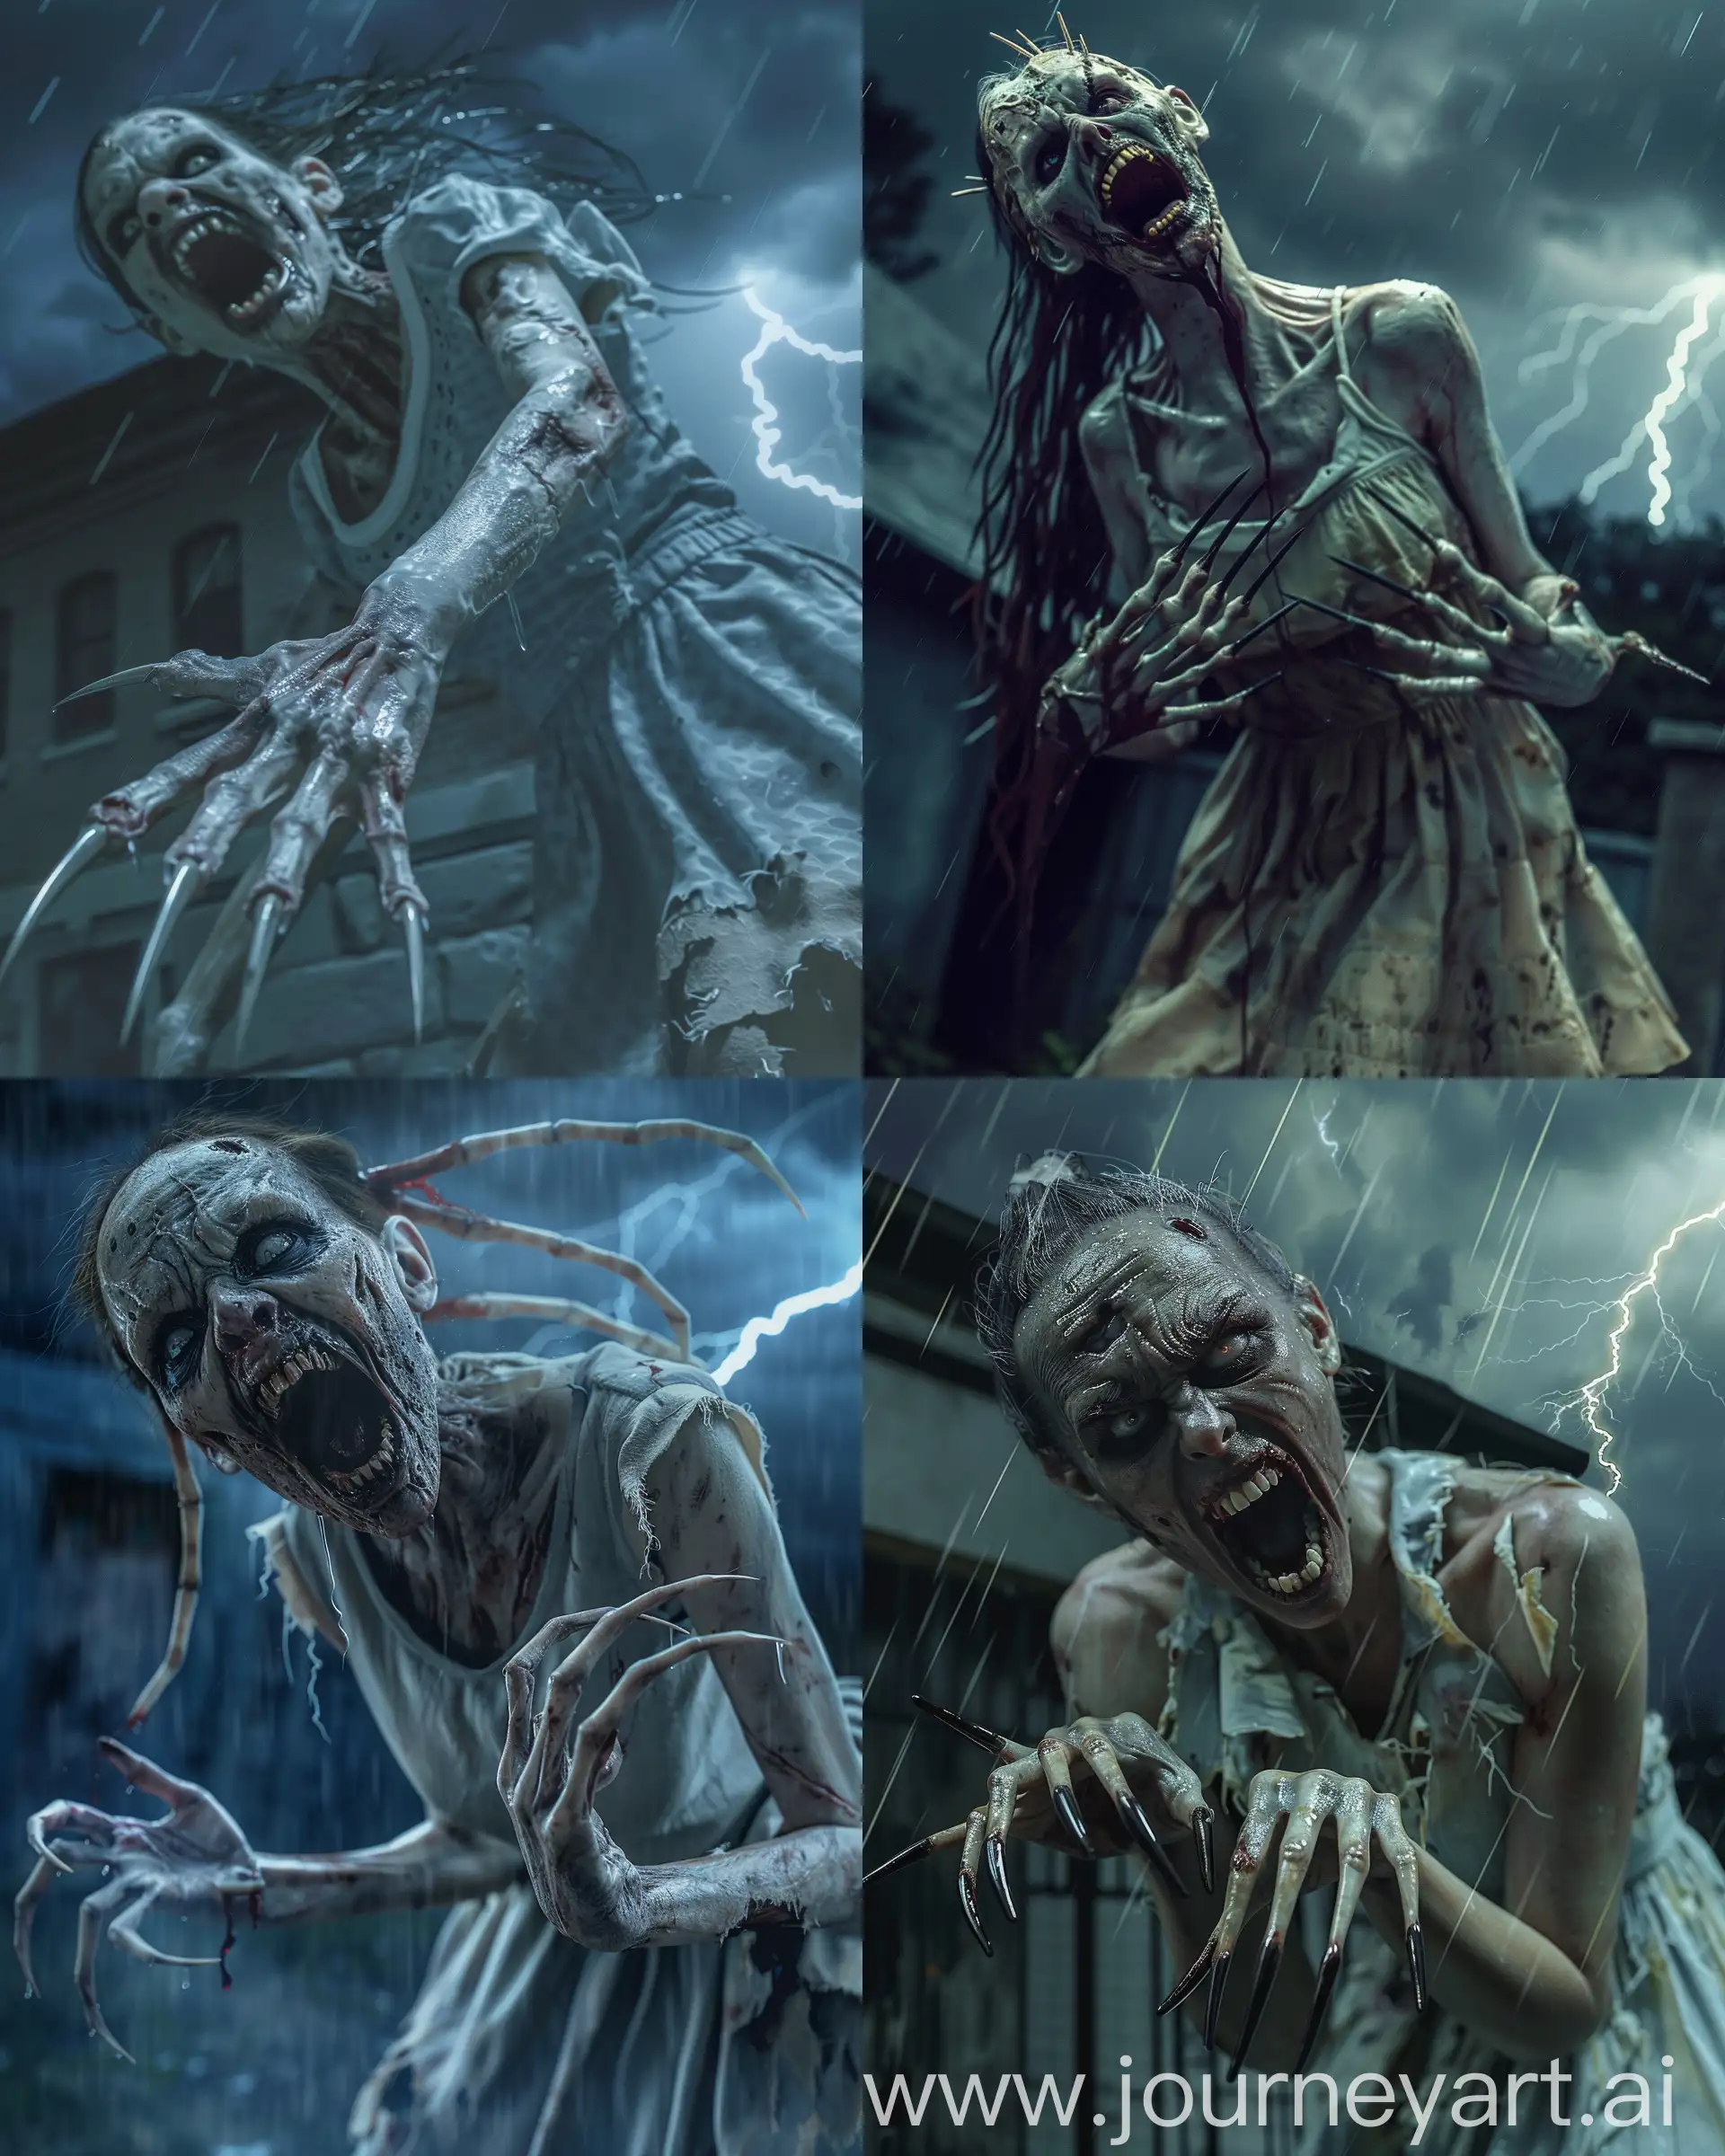 A Terrible zombie woman with long curved pointed nails protruding from her fingers like menacing claws, she looks like a who has climbed out of the grave, her mouth is threateningly open exposing pointed teeth resembling fangs, The scene takes place at night, in an abandoned building, hyper-realism, cinematography, high detail, the smallest details, horror, fear.photorealistic photography of a zombie woman with no eyes and a tattered dress, in the style of realistic hyper - detail, playful character designs, 32k uhd, grotesque, cabincore, necropunk, zombie, very dark stormy sky, lightning striking, torrential rain, professional photography, national geographic award winning photography, zombie stalking prey, close - up --ar 4:5